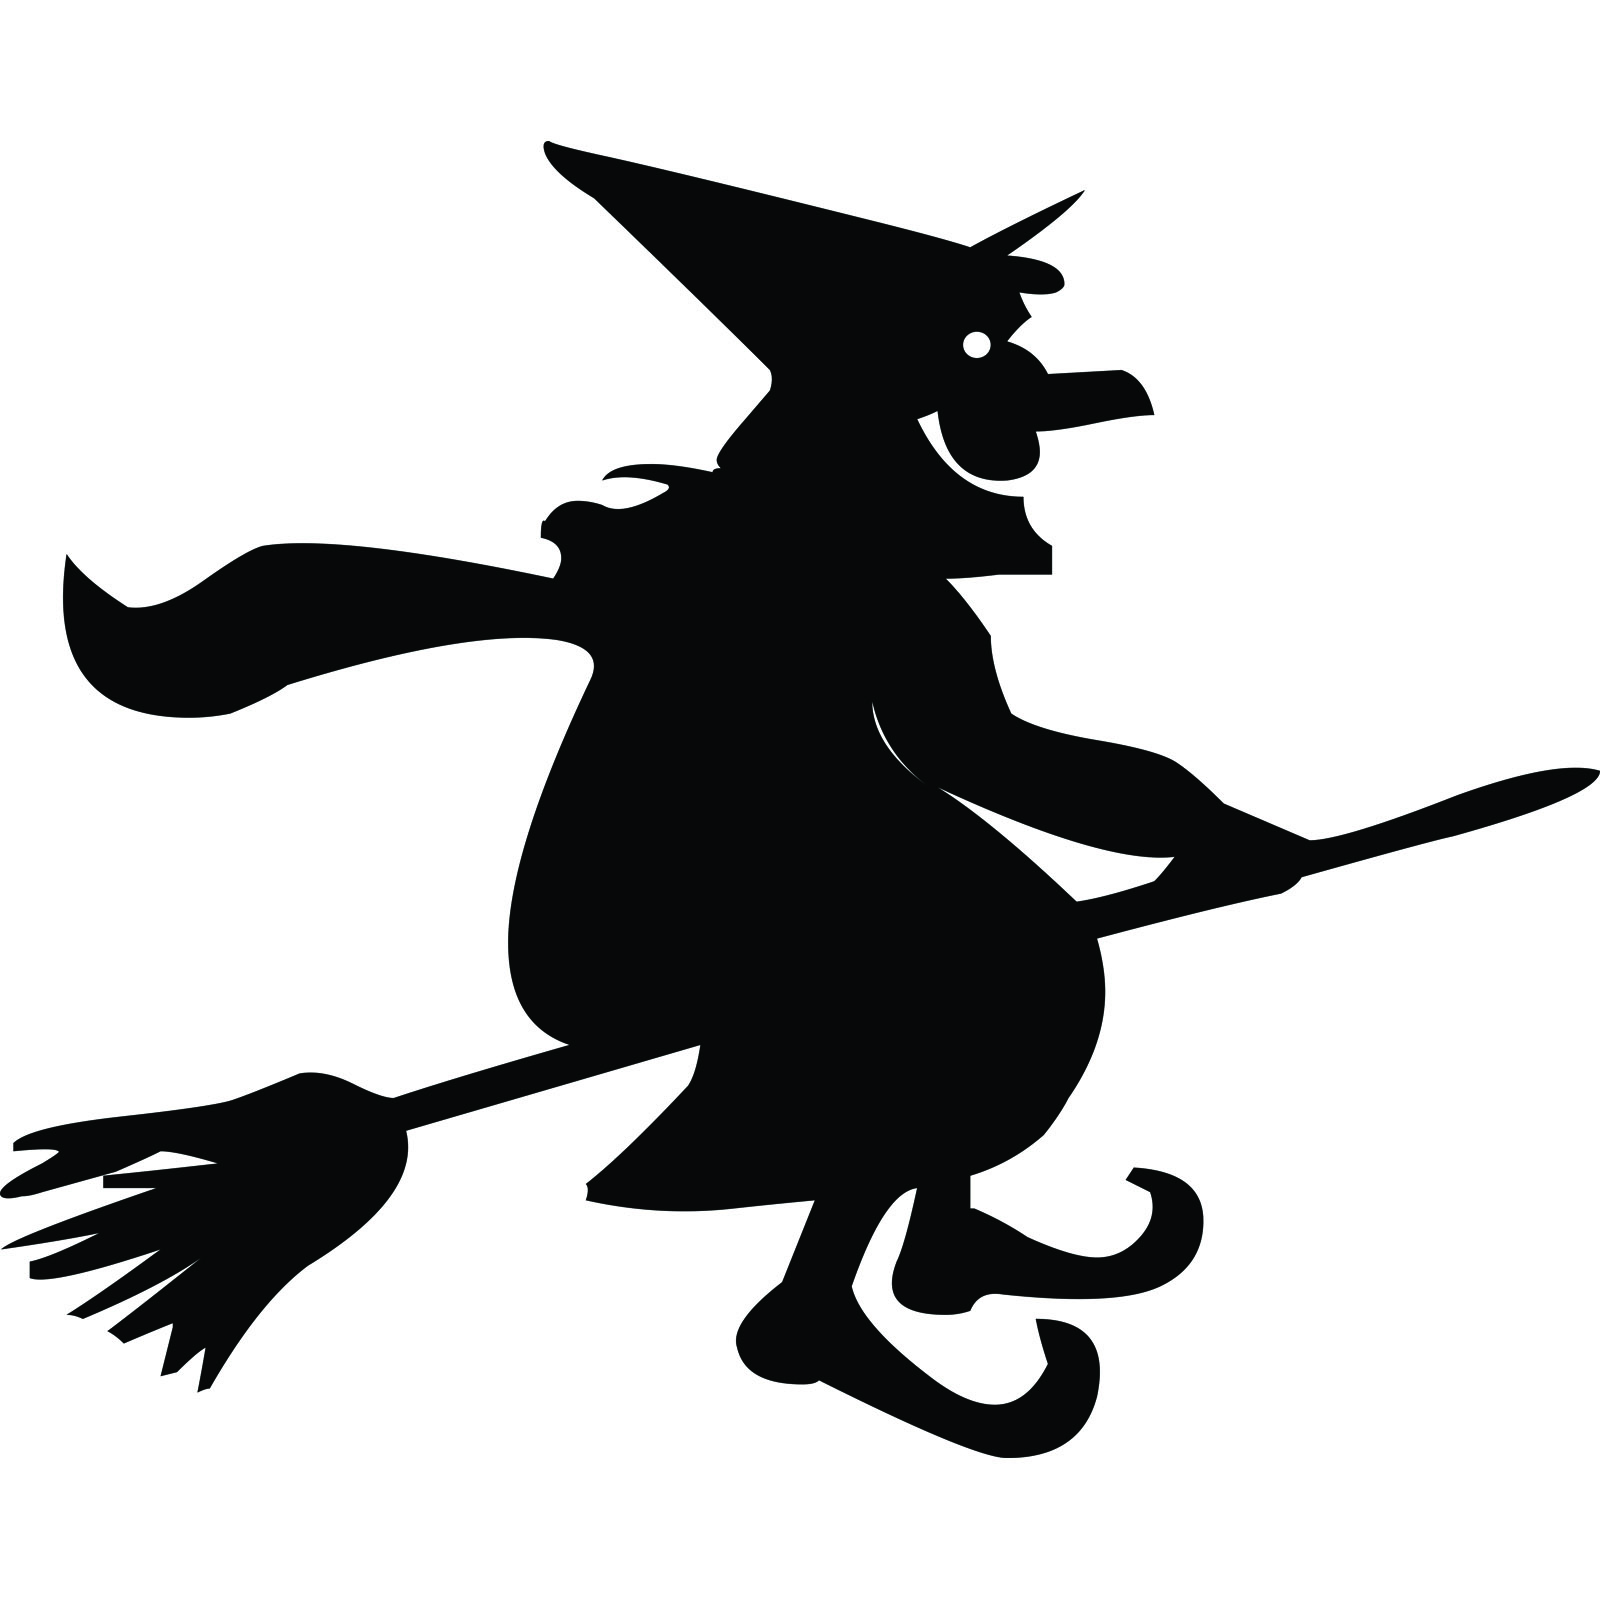 Free Cartoon Halloween Witches, Download Free Cartoon Halloween Witches png images, Free